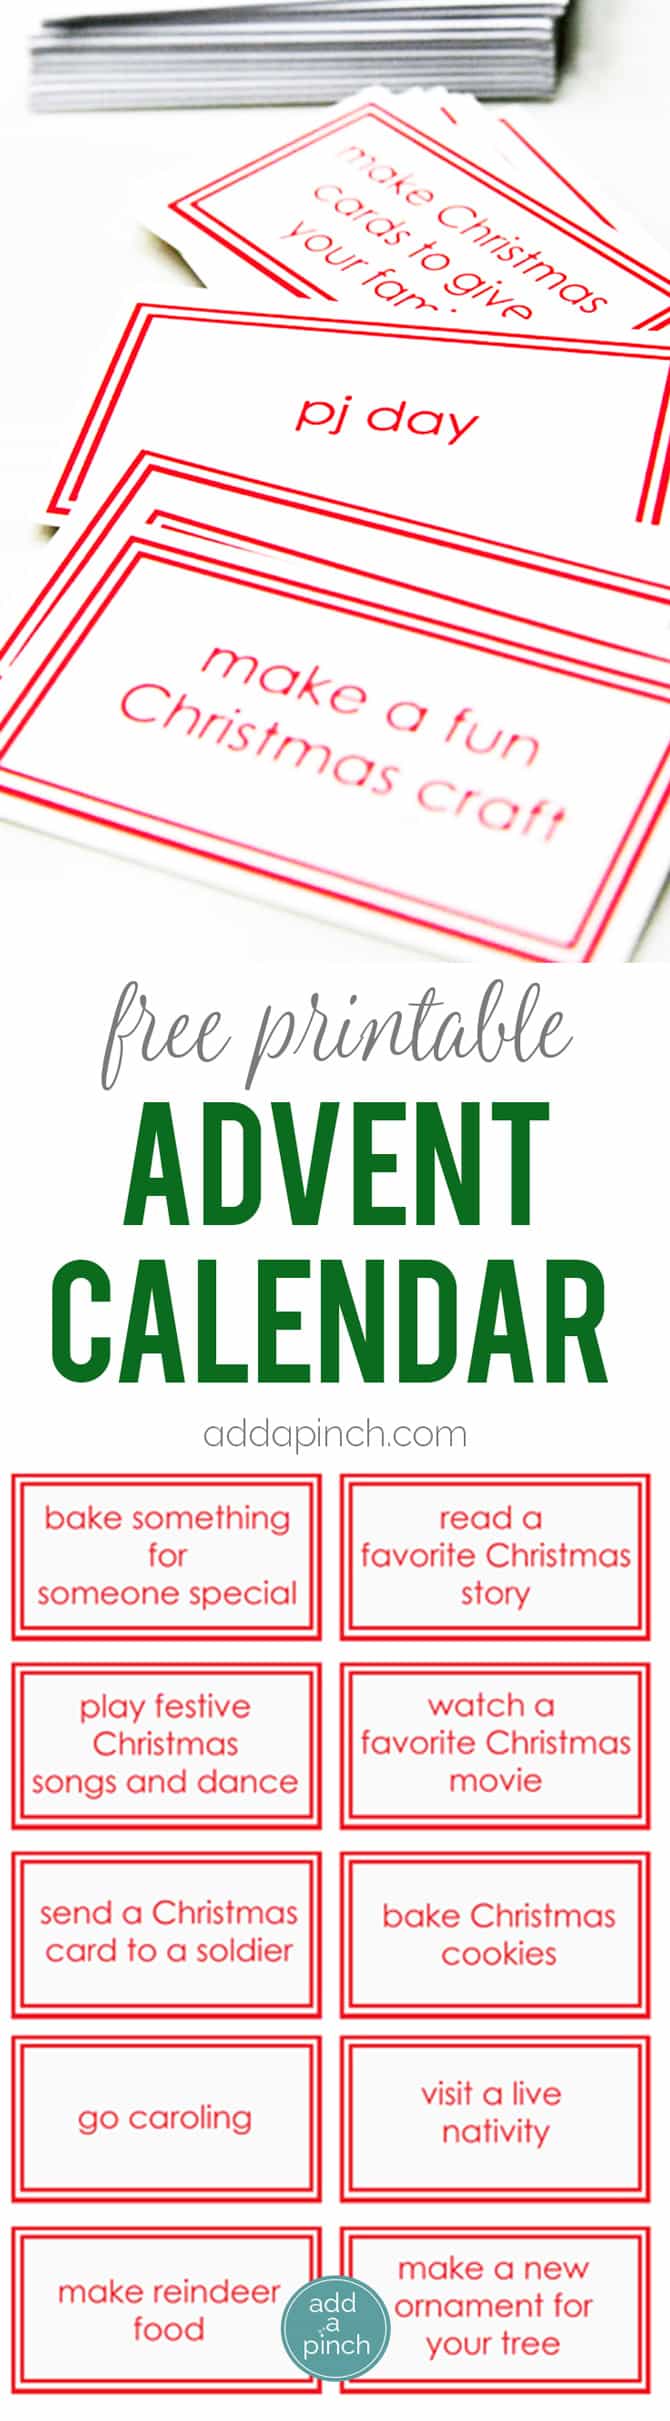 Free Printable Advent Calendar Cards - This Children's Advent Calendar Printable adds a bit of fun and memorable traditions to your Christmas. 30 children's advent calendar ideas and cards. // addapinch.com